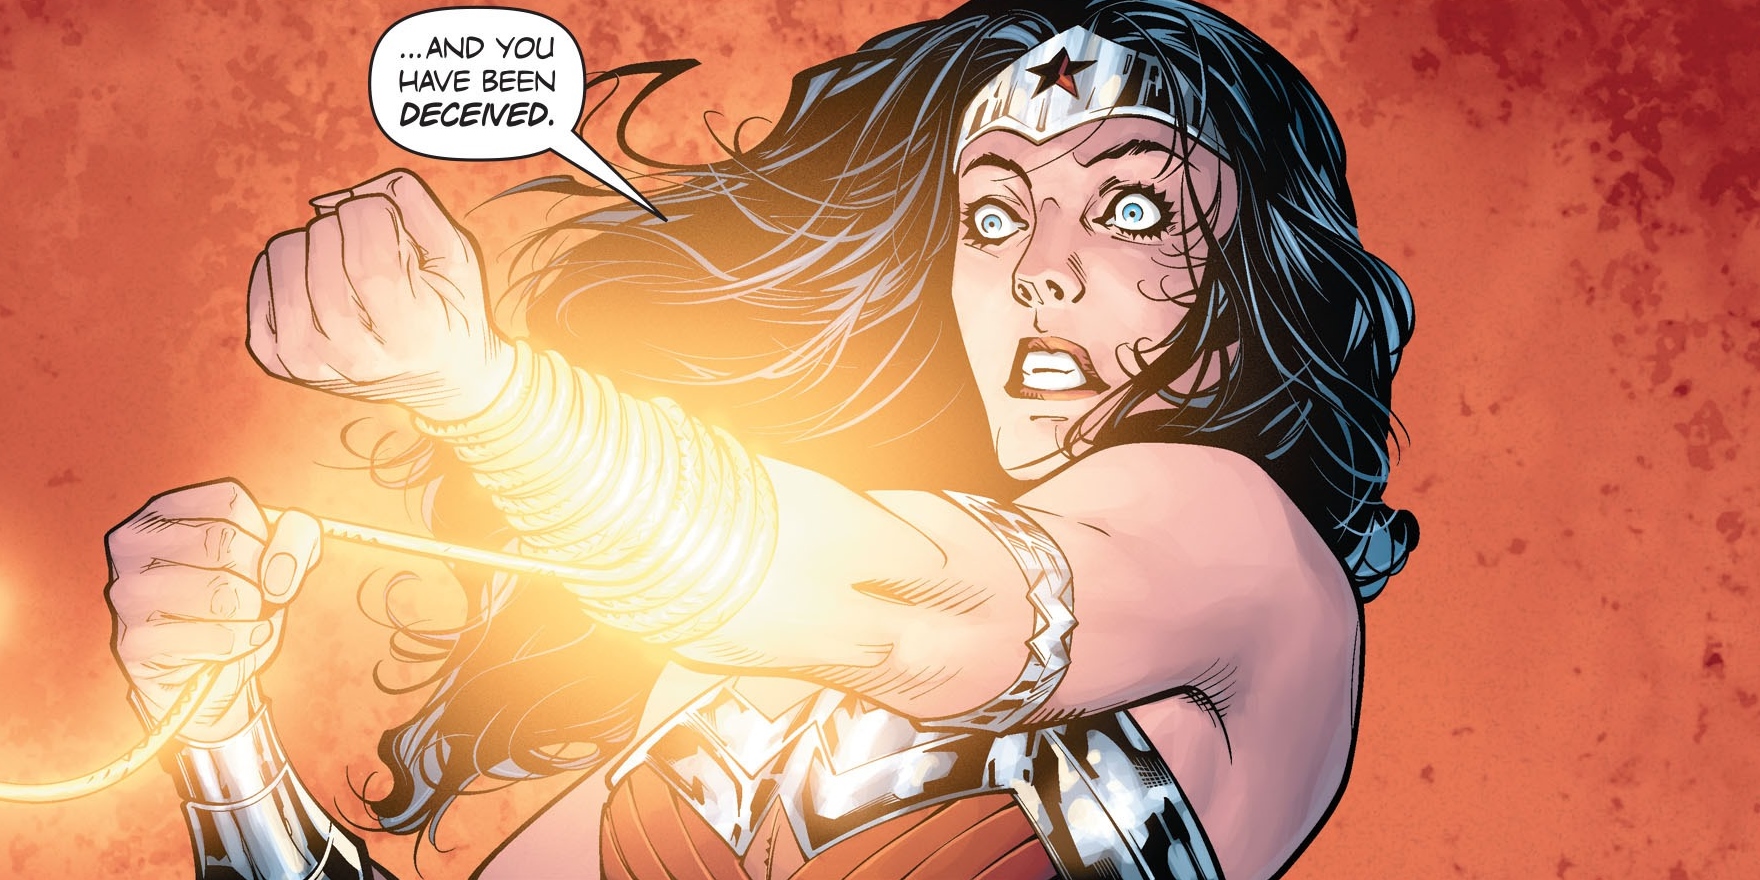 5 Things We Need to See for an Absolutely GLORIOUS Wonder Woman Movie